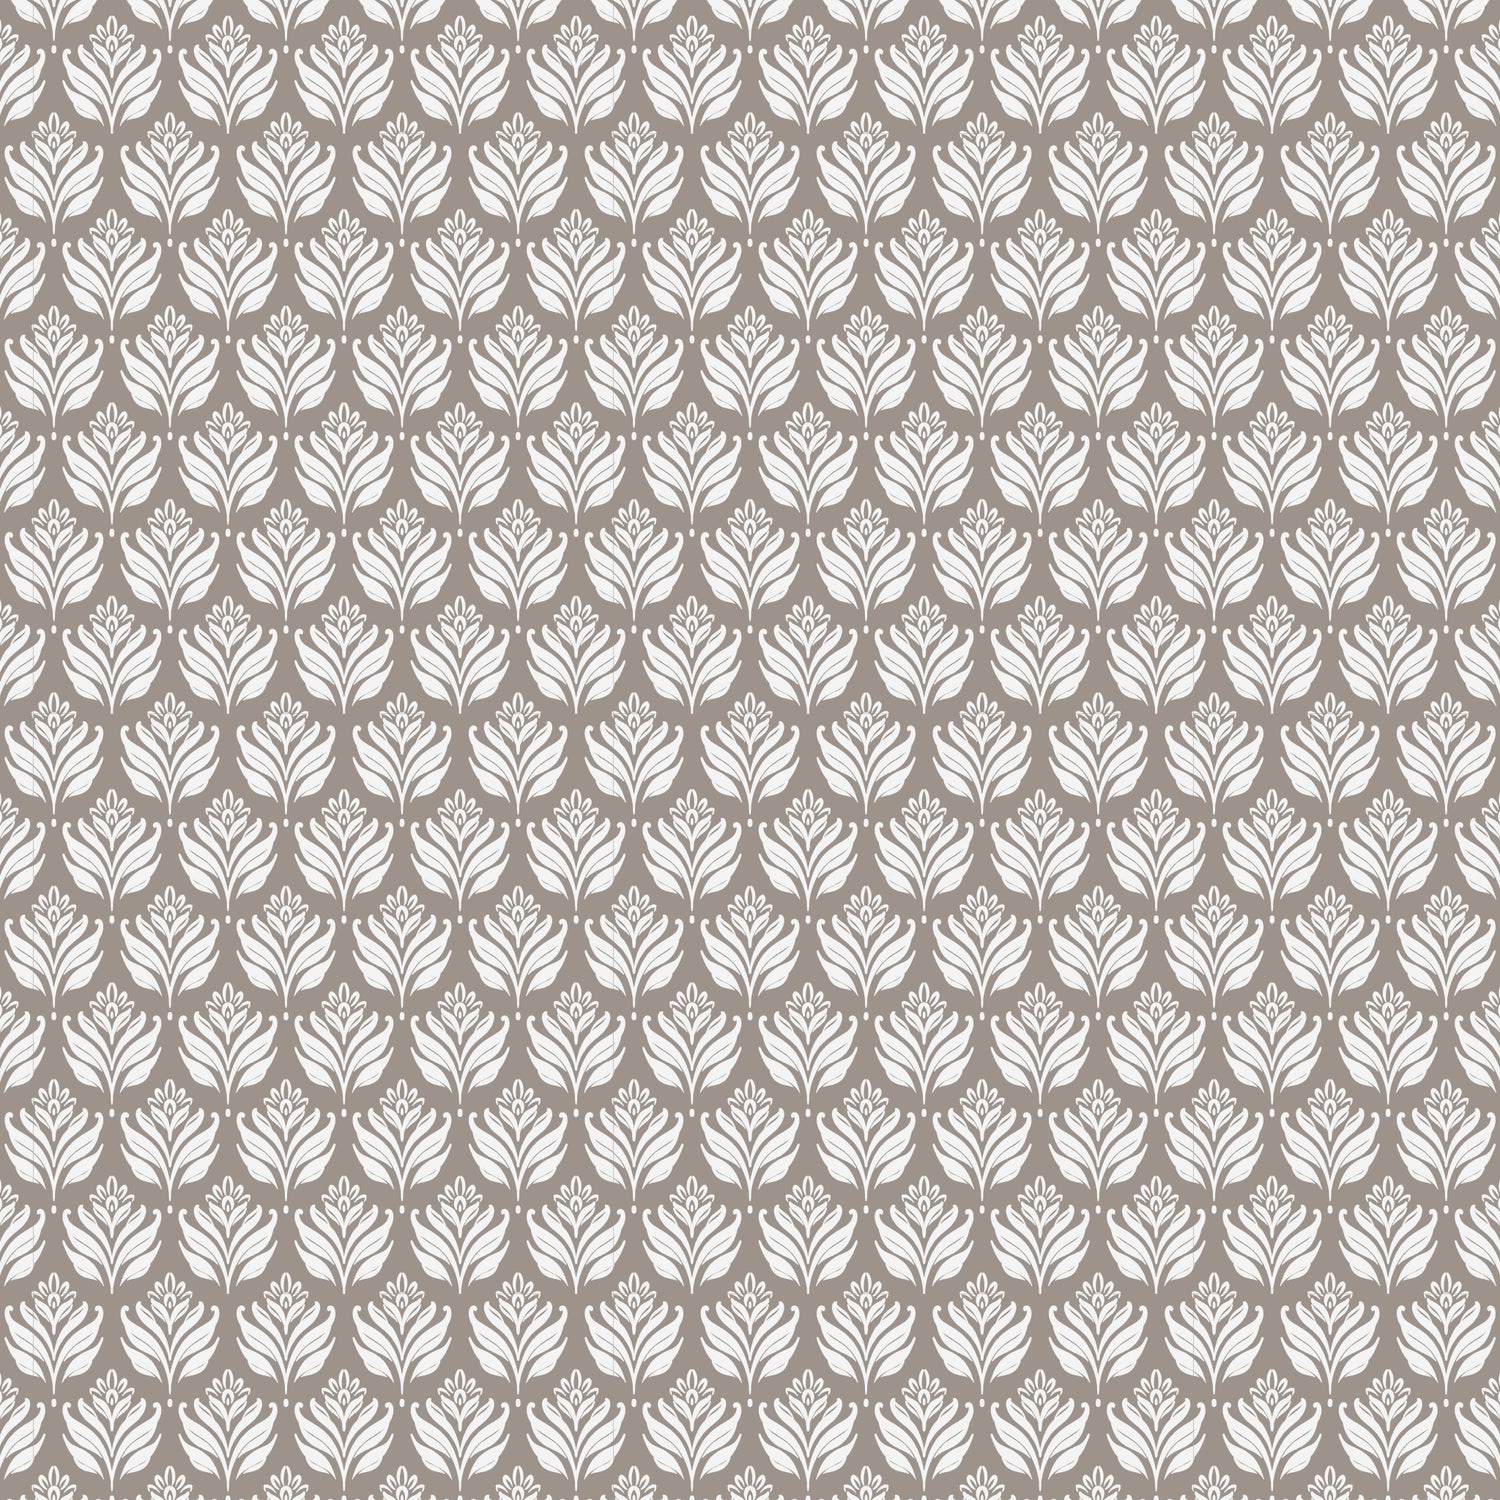 Introducing our Elegant Leaves Wallpaper in Oatmeal. These subtle leaves add a touch of sophistication to any space. Elevate your room with our premium wallpaper, designed for those with refined taste.